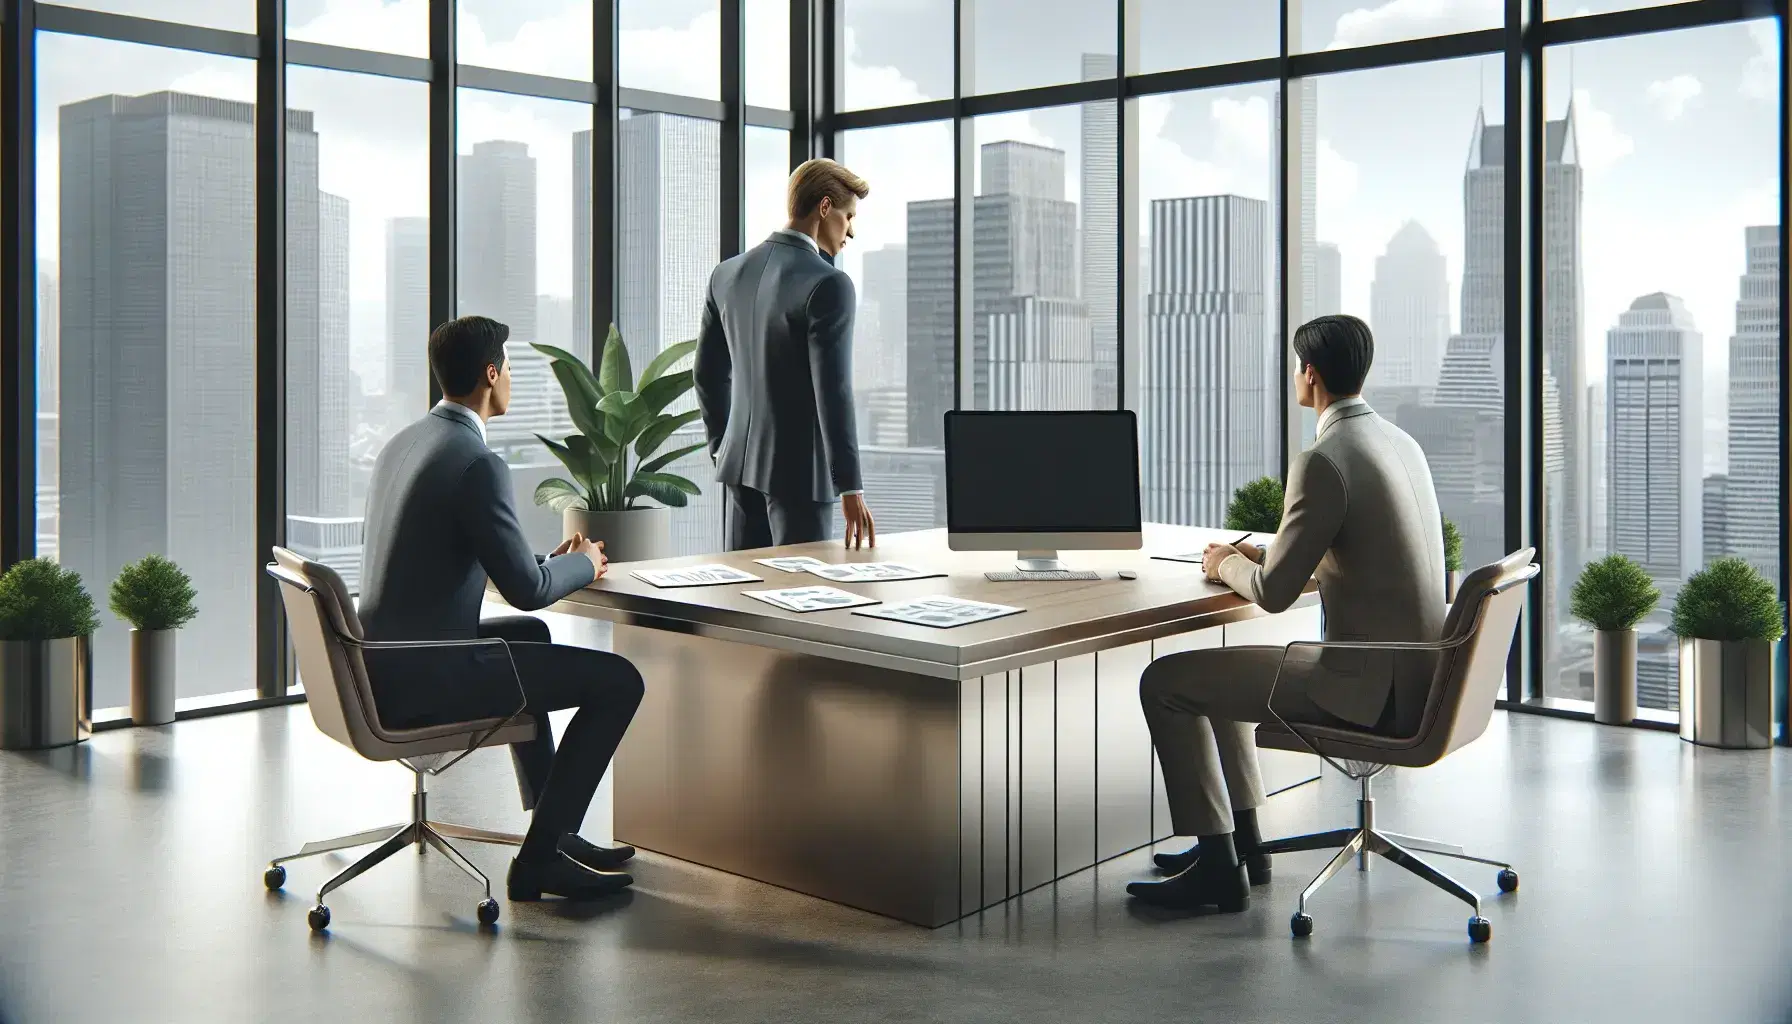 Three professionals collaborate around a modern desk with a laptop and papers in a well-lit office with city views and greenery.